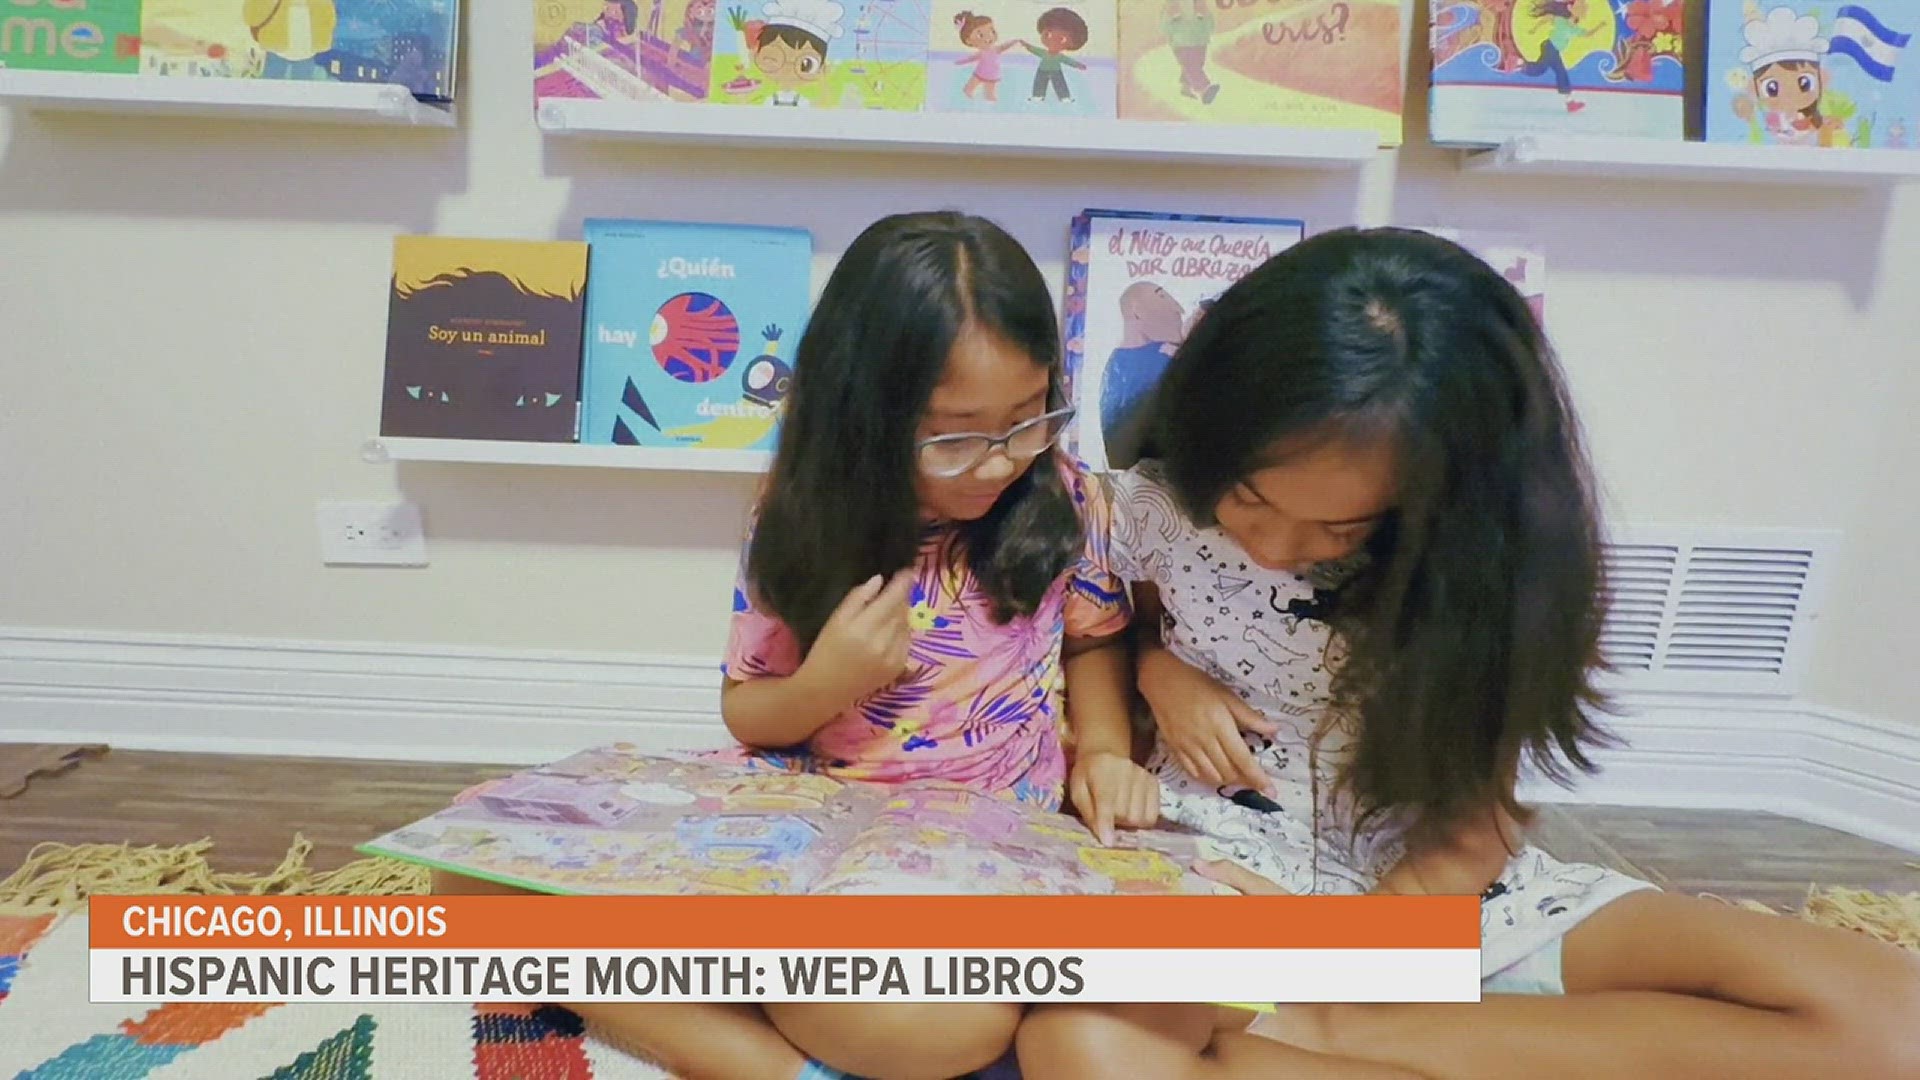 WEPA Libros is a program bringing students born in Latin American families books from their native cultures.